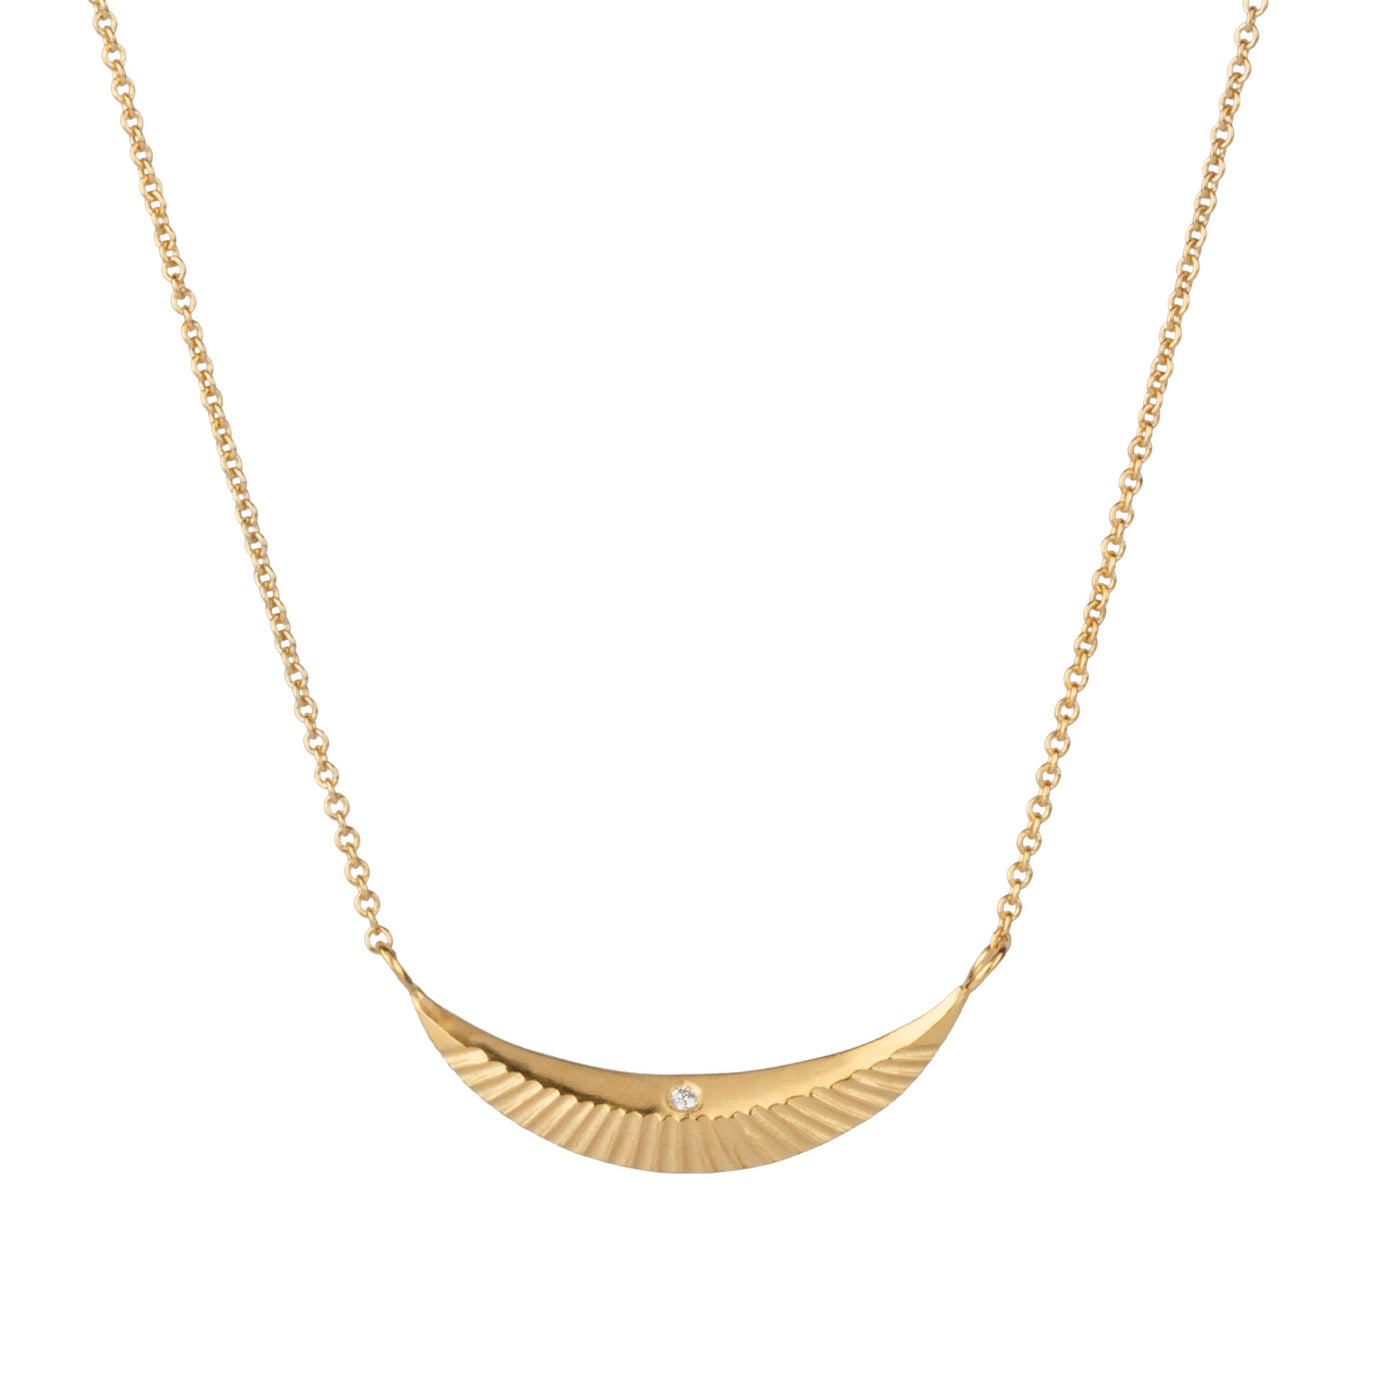 Crescent necklace with carved rays and a single diamond in vermeil  on a white background